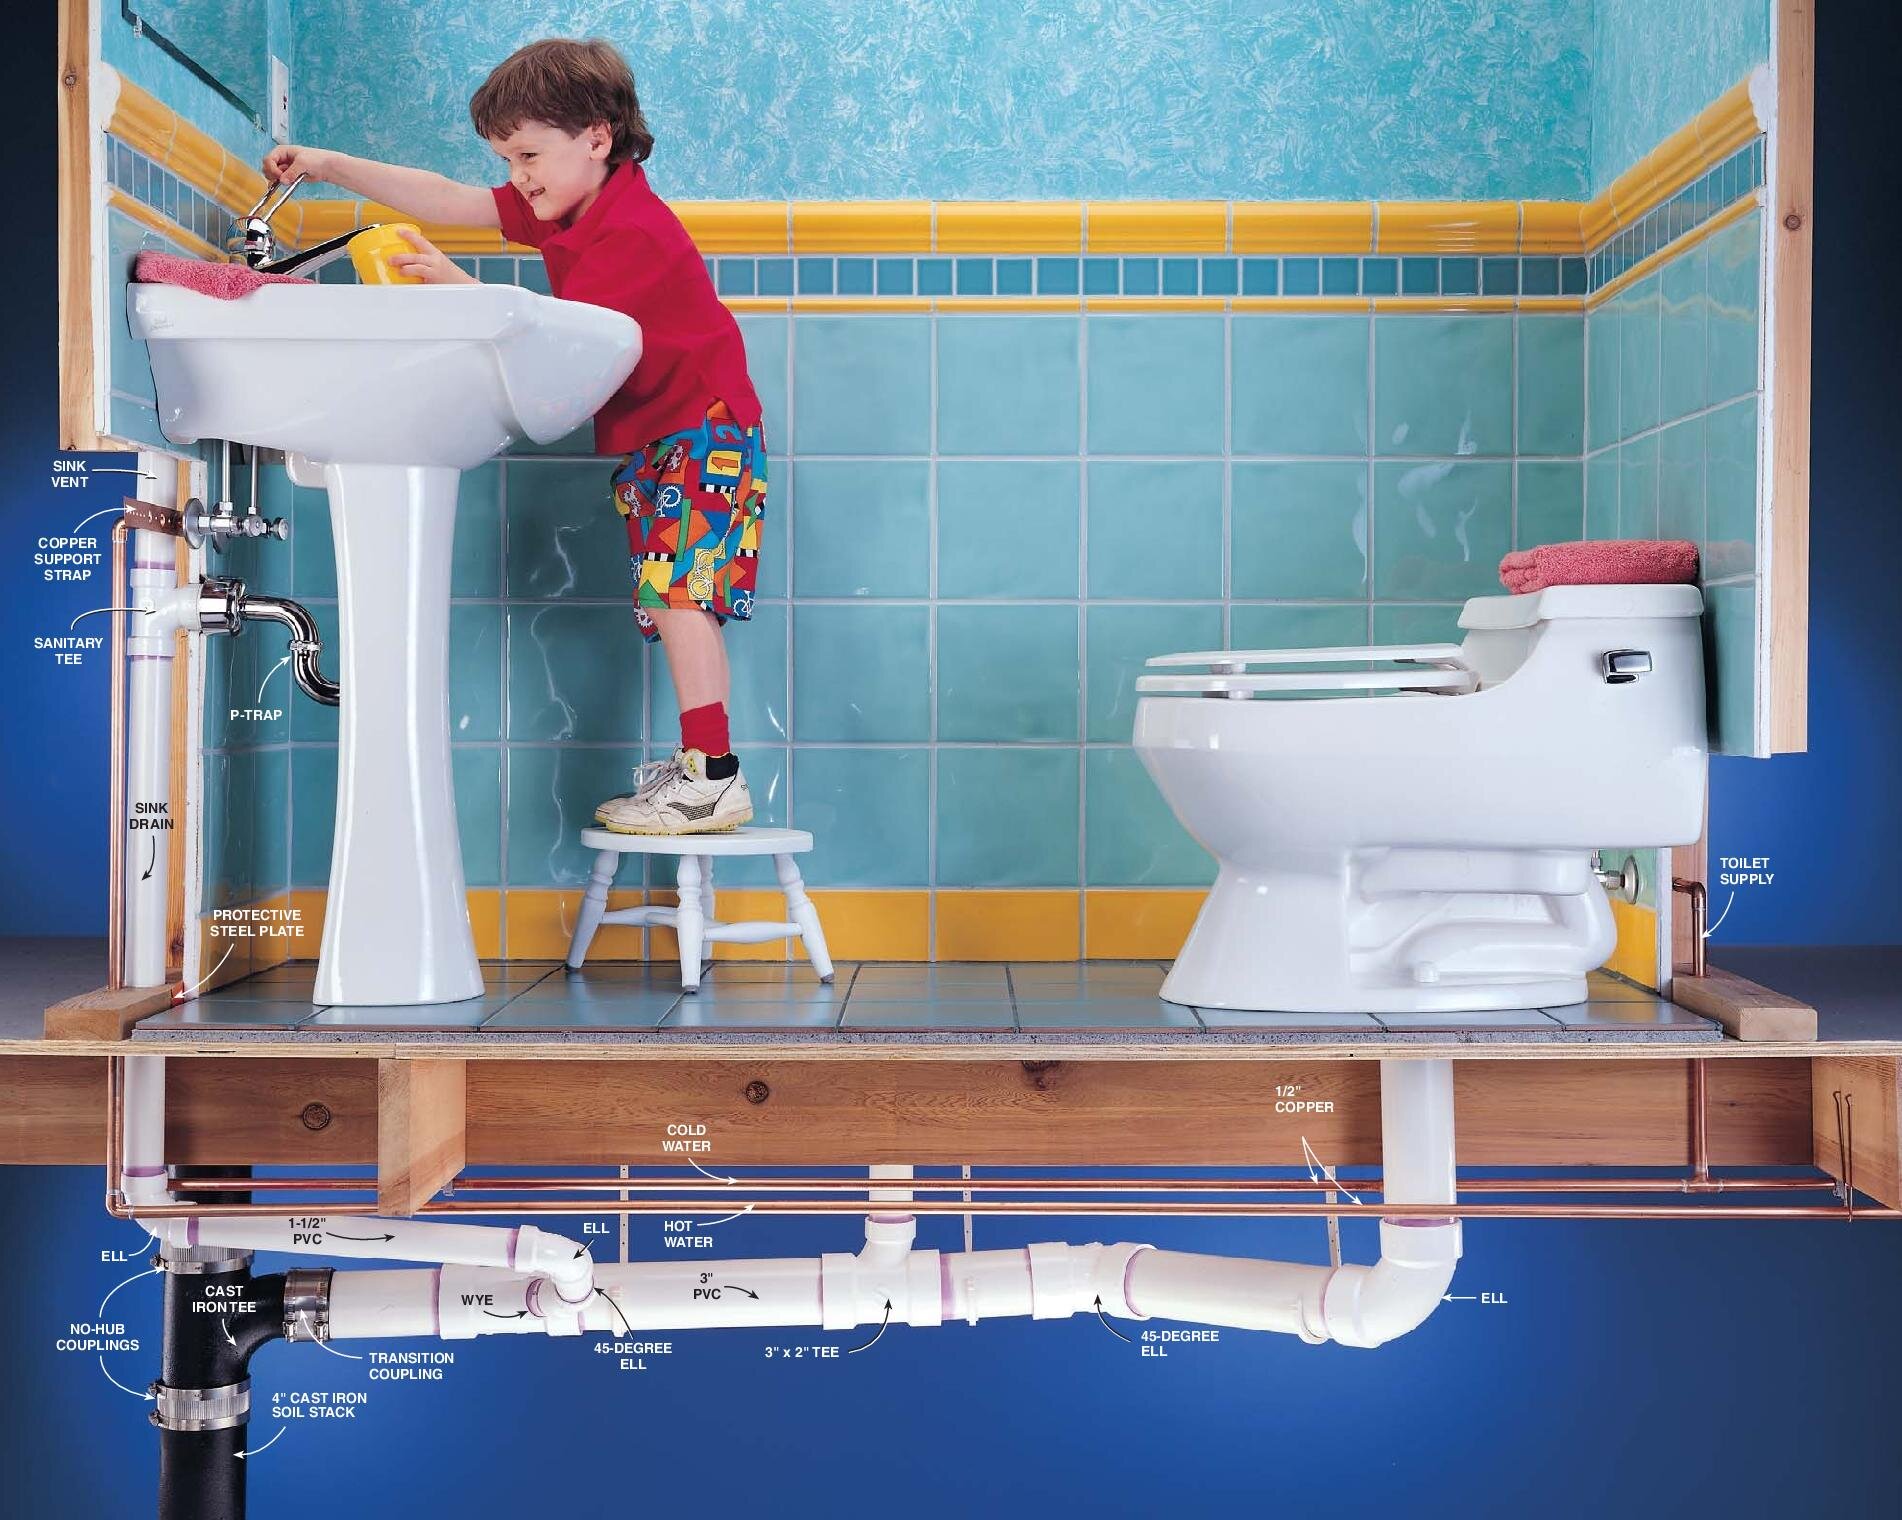 Plumbers Margate is proud to offer a full range of plumbing services that consist of drain cleaning, water heater repair and sewer system repair.